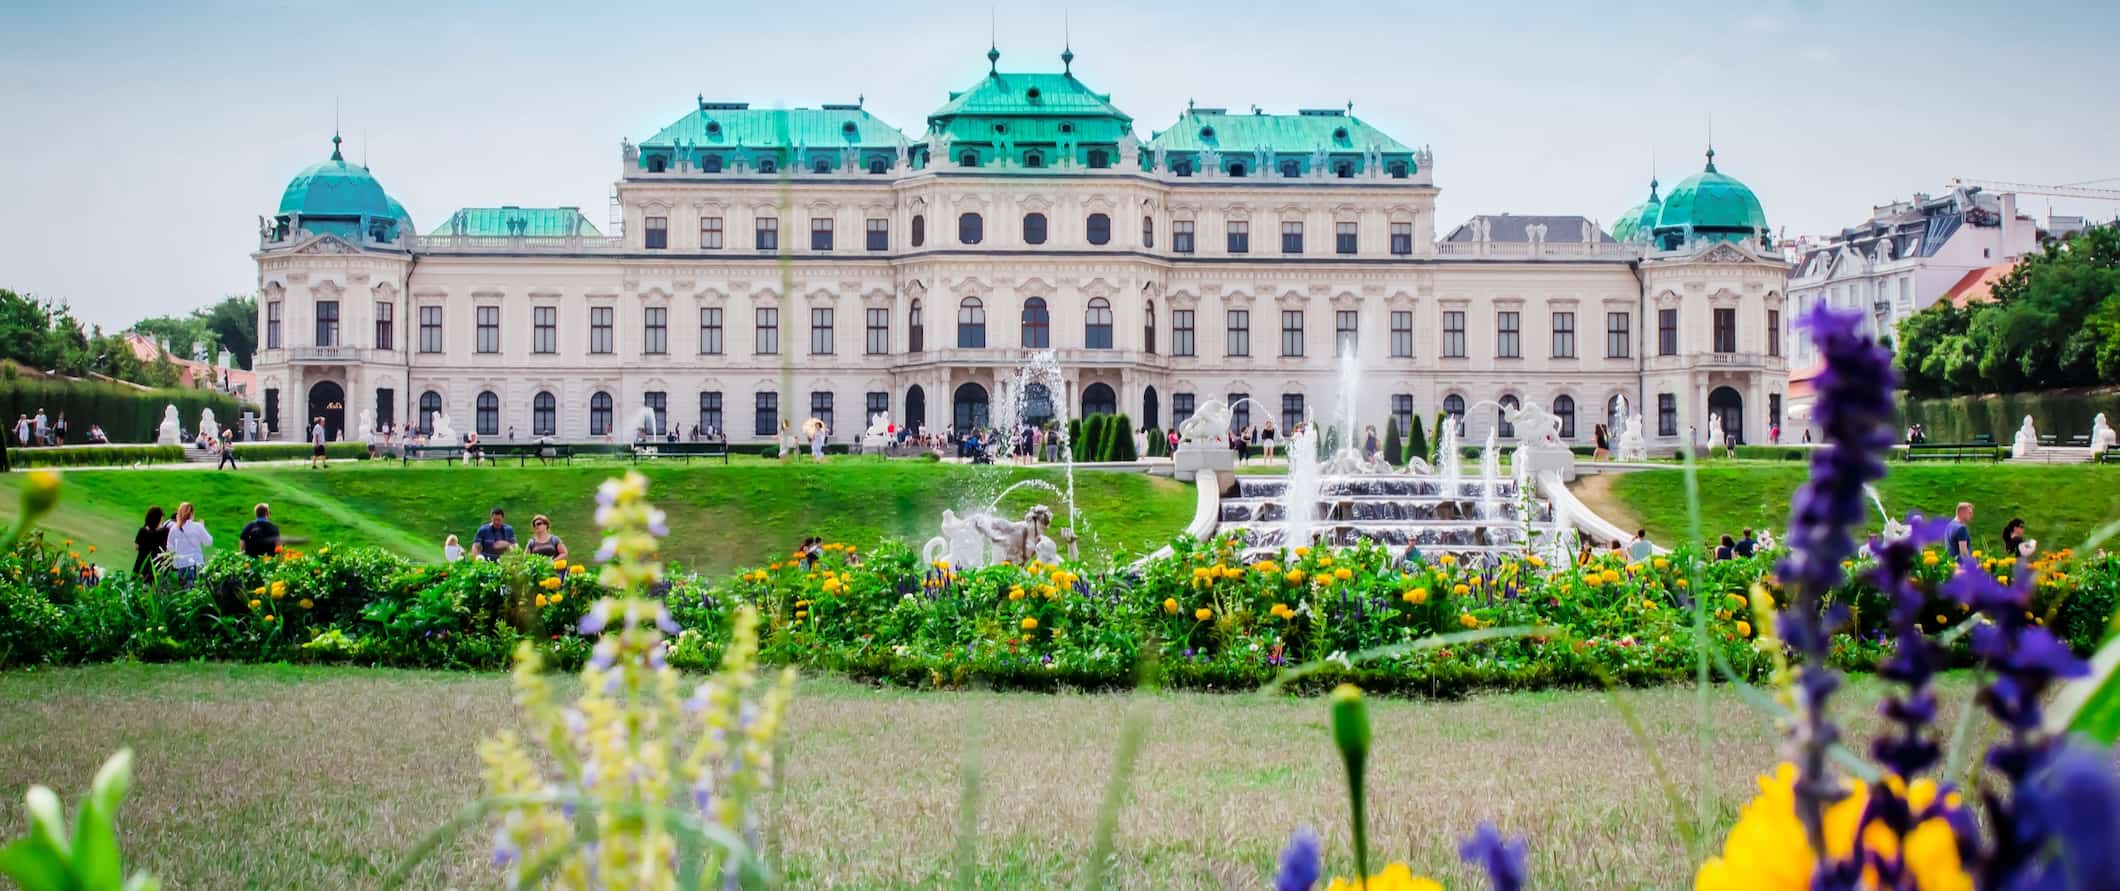 The iconic and historic Belvedere Palace in Vienna, Austria